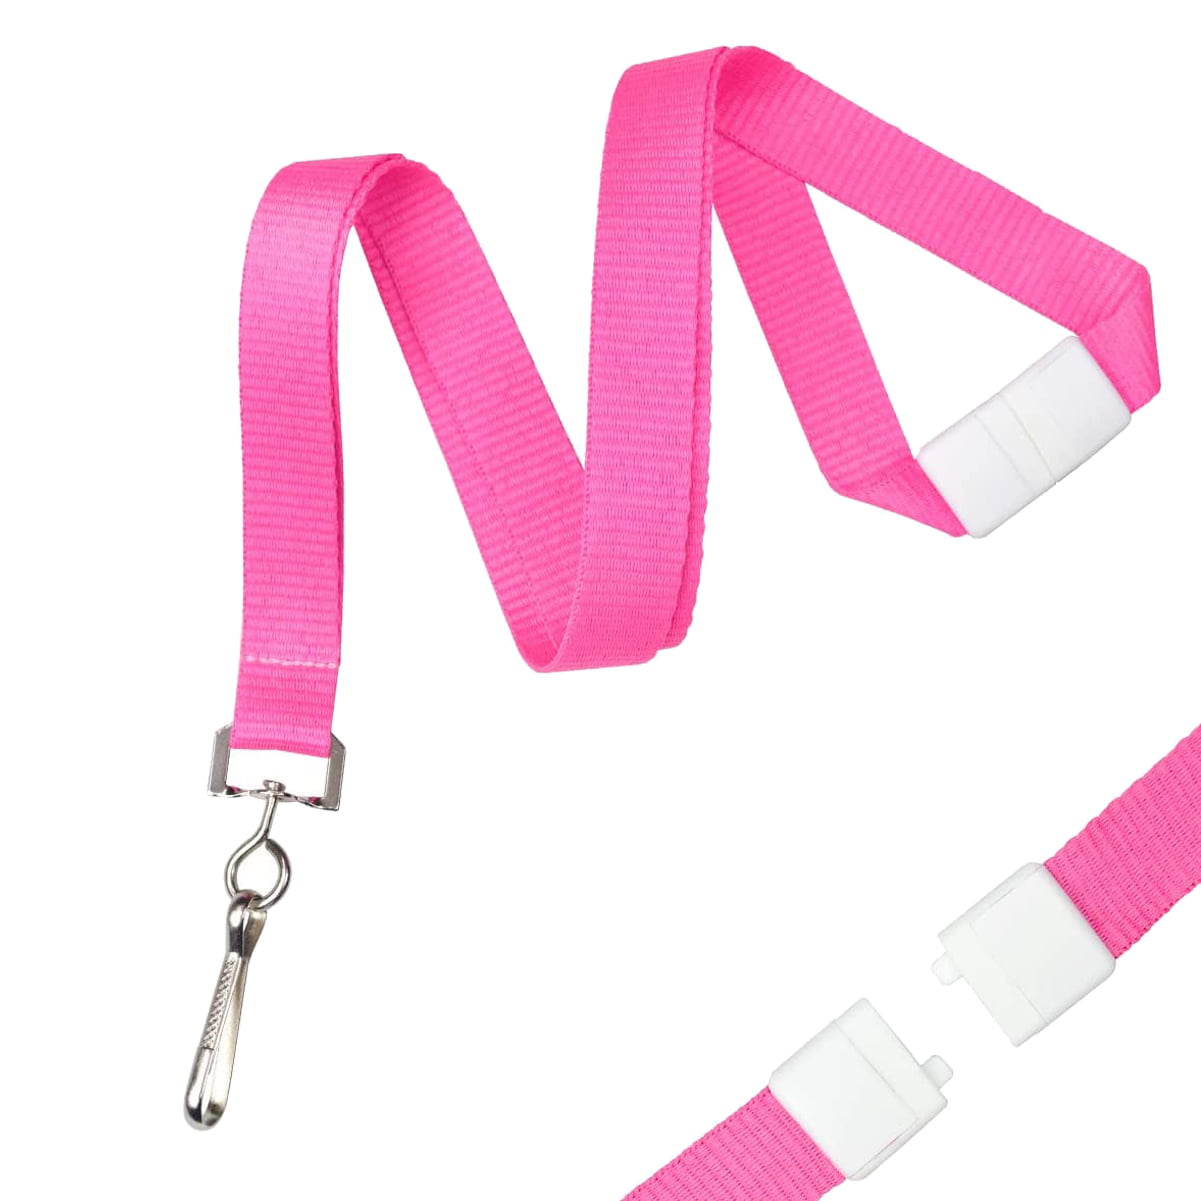 Plastic Clip Student ID Card Holder Lanyard Neck Strap with Safety Breakaway 